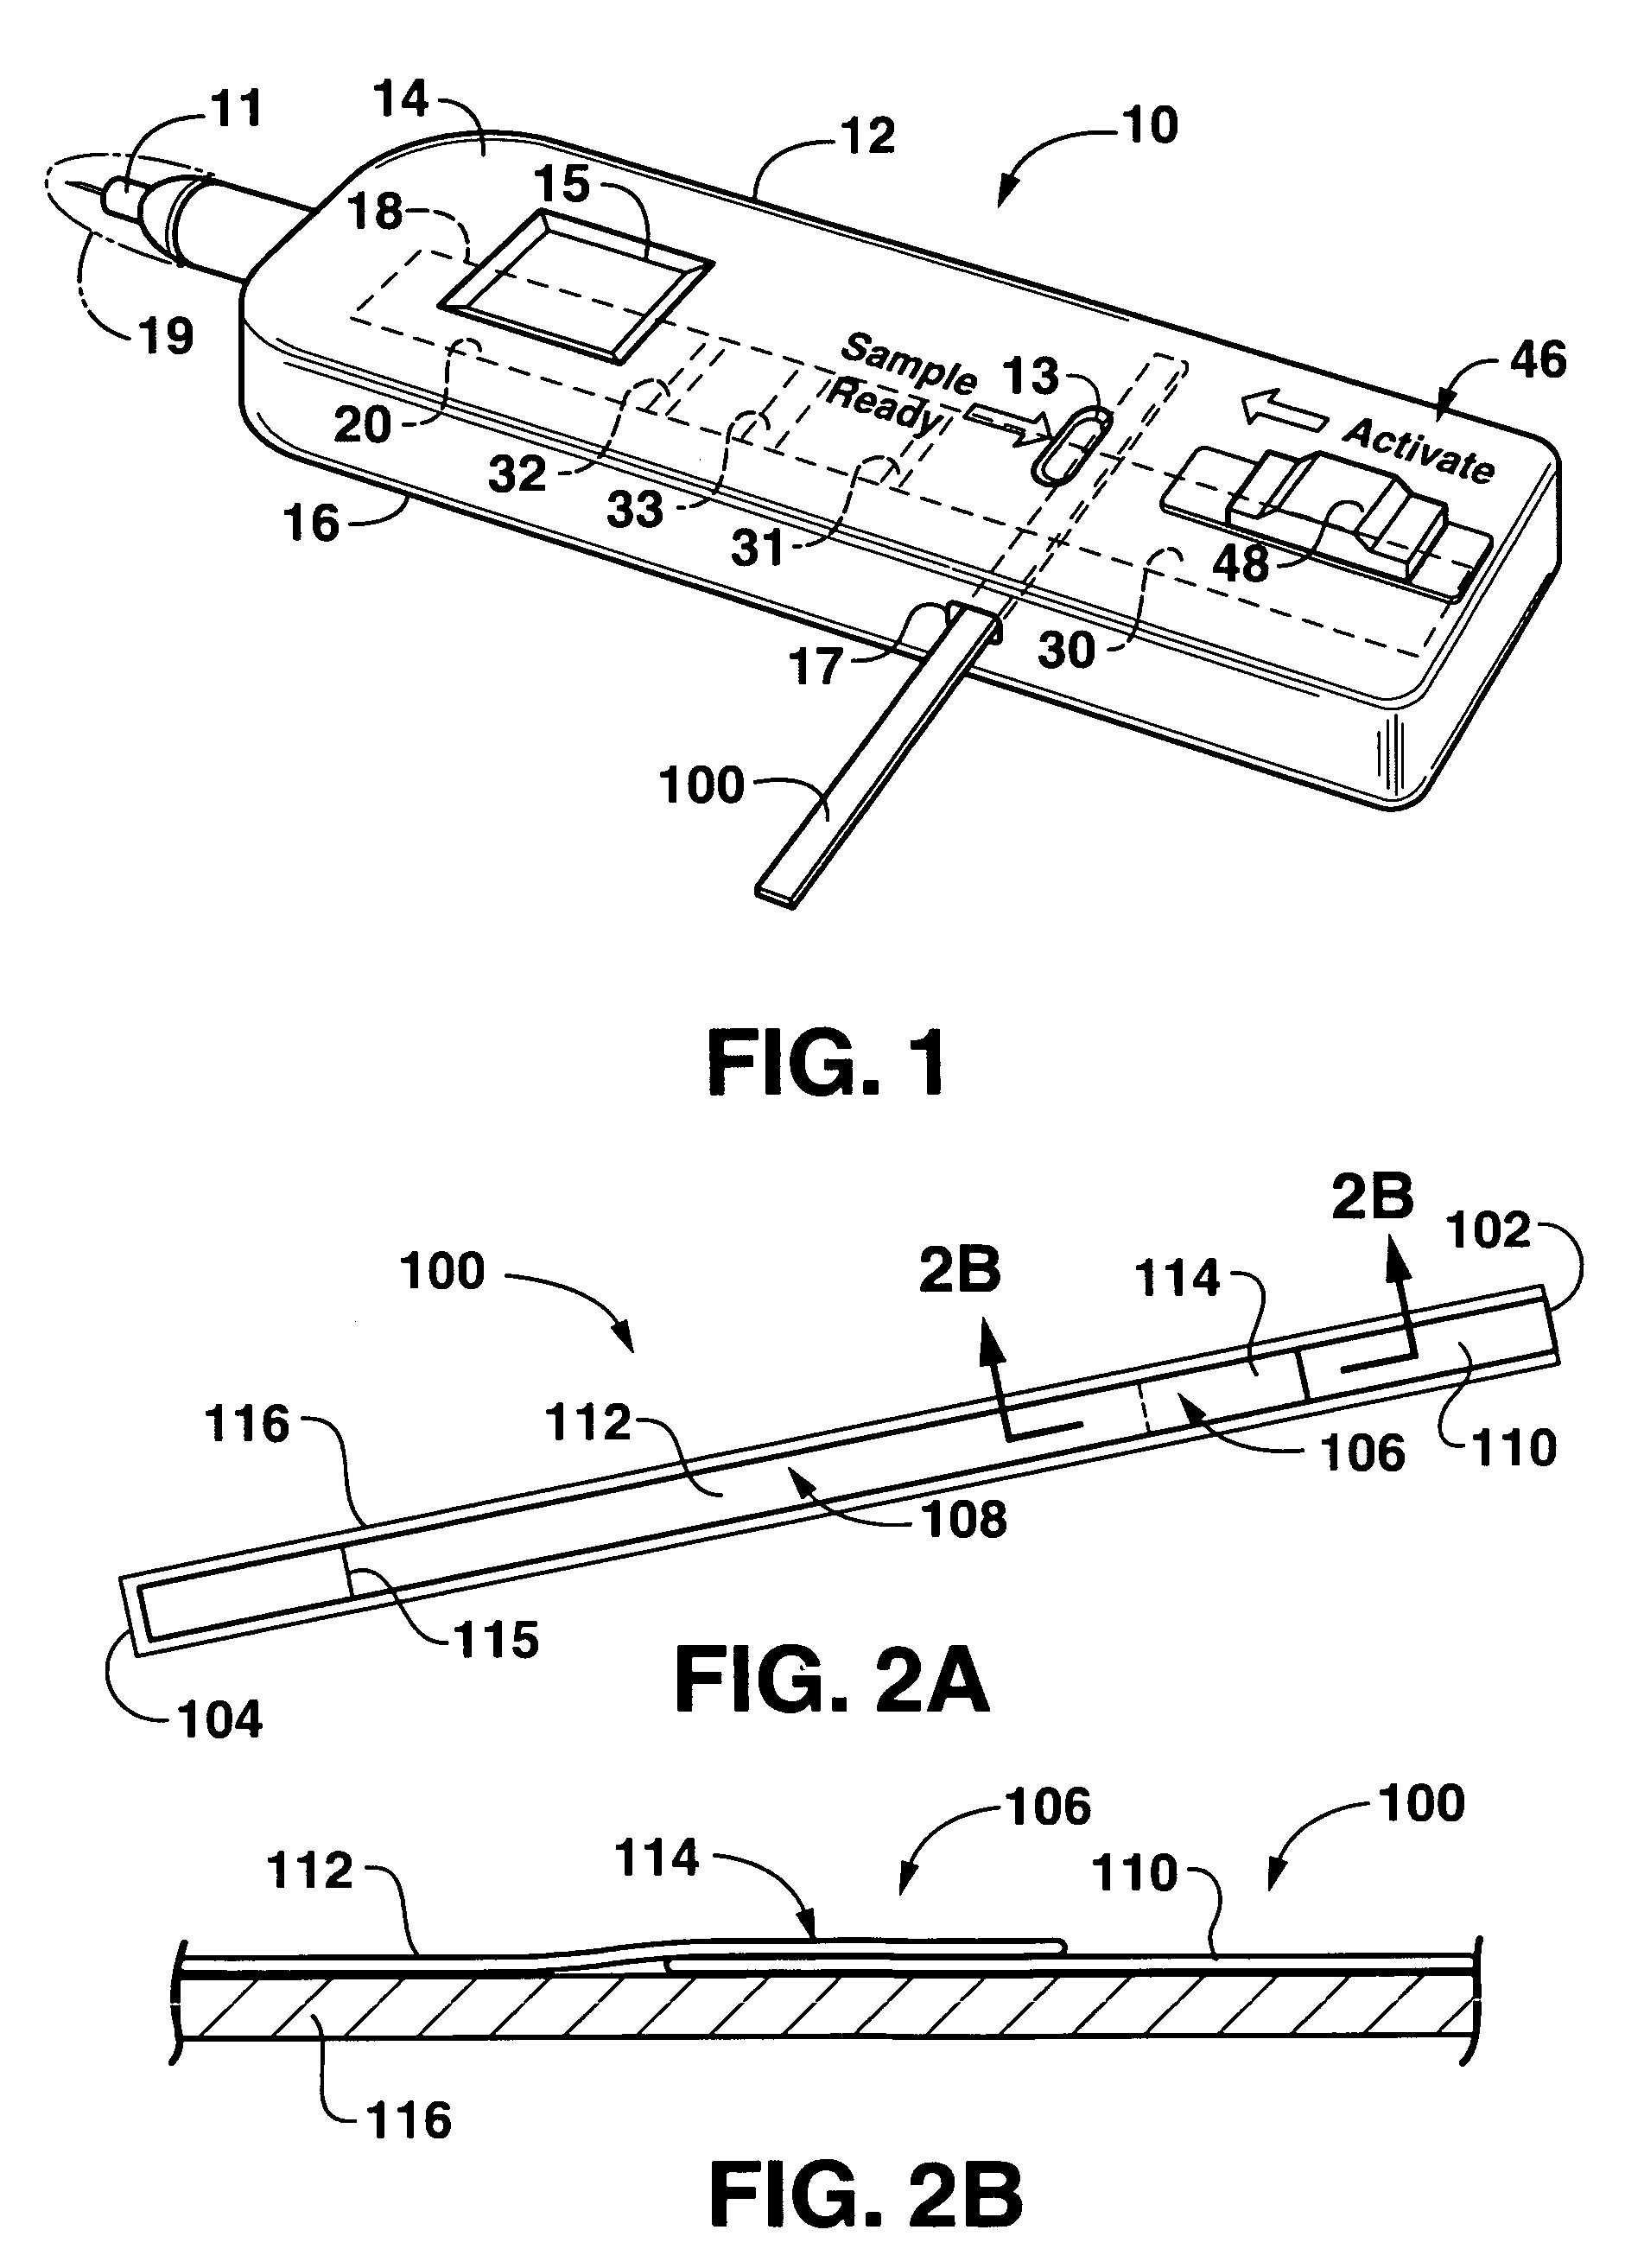 Lateral flow assay device